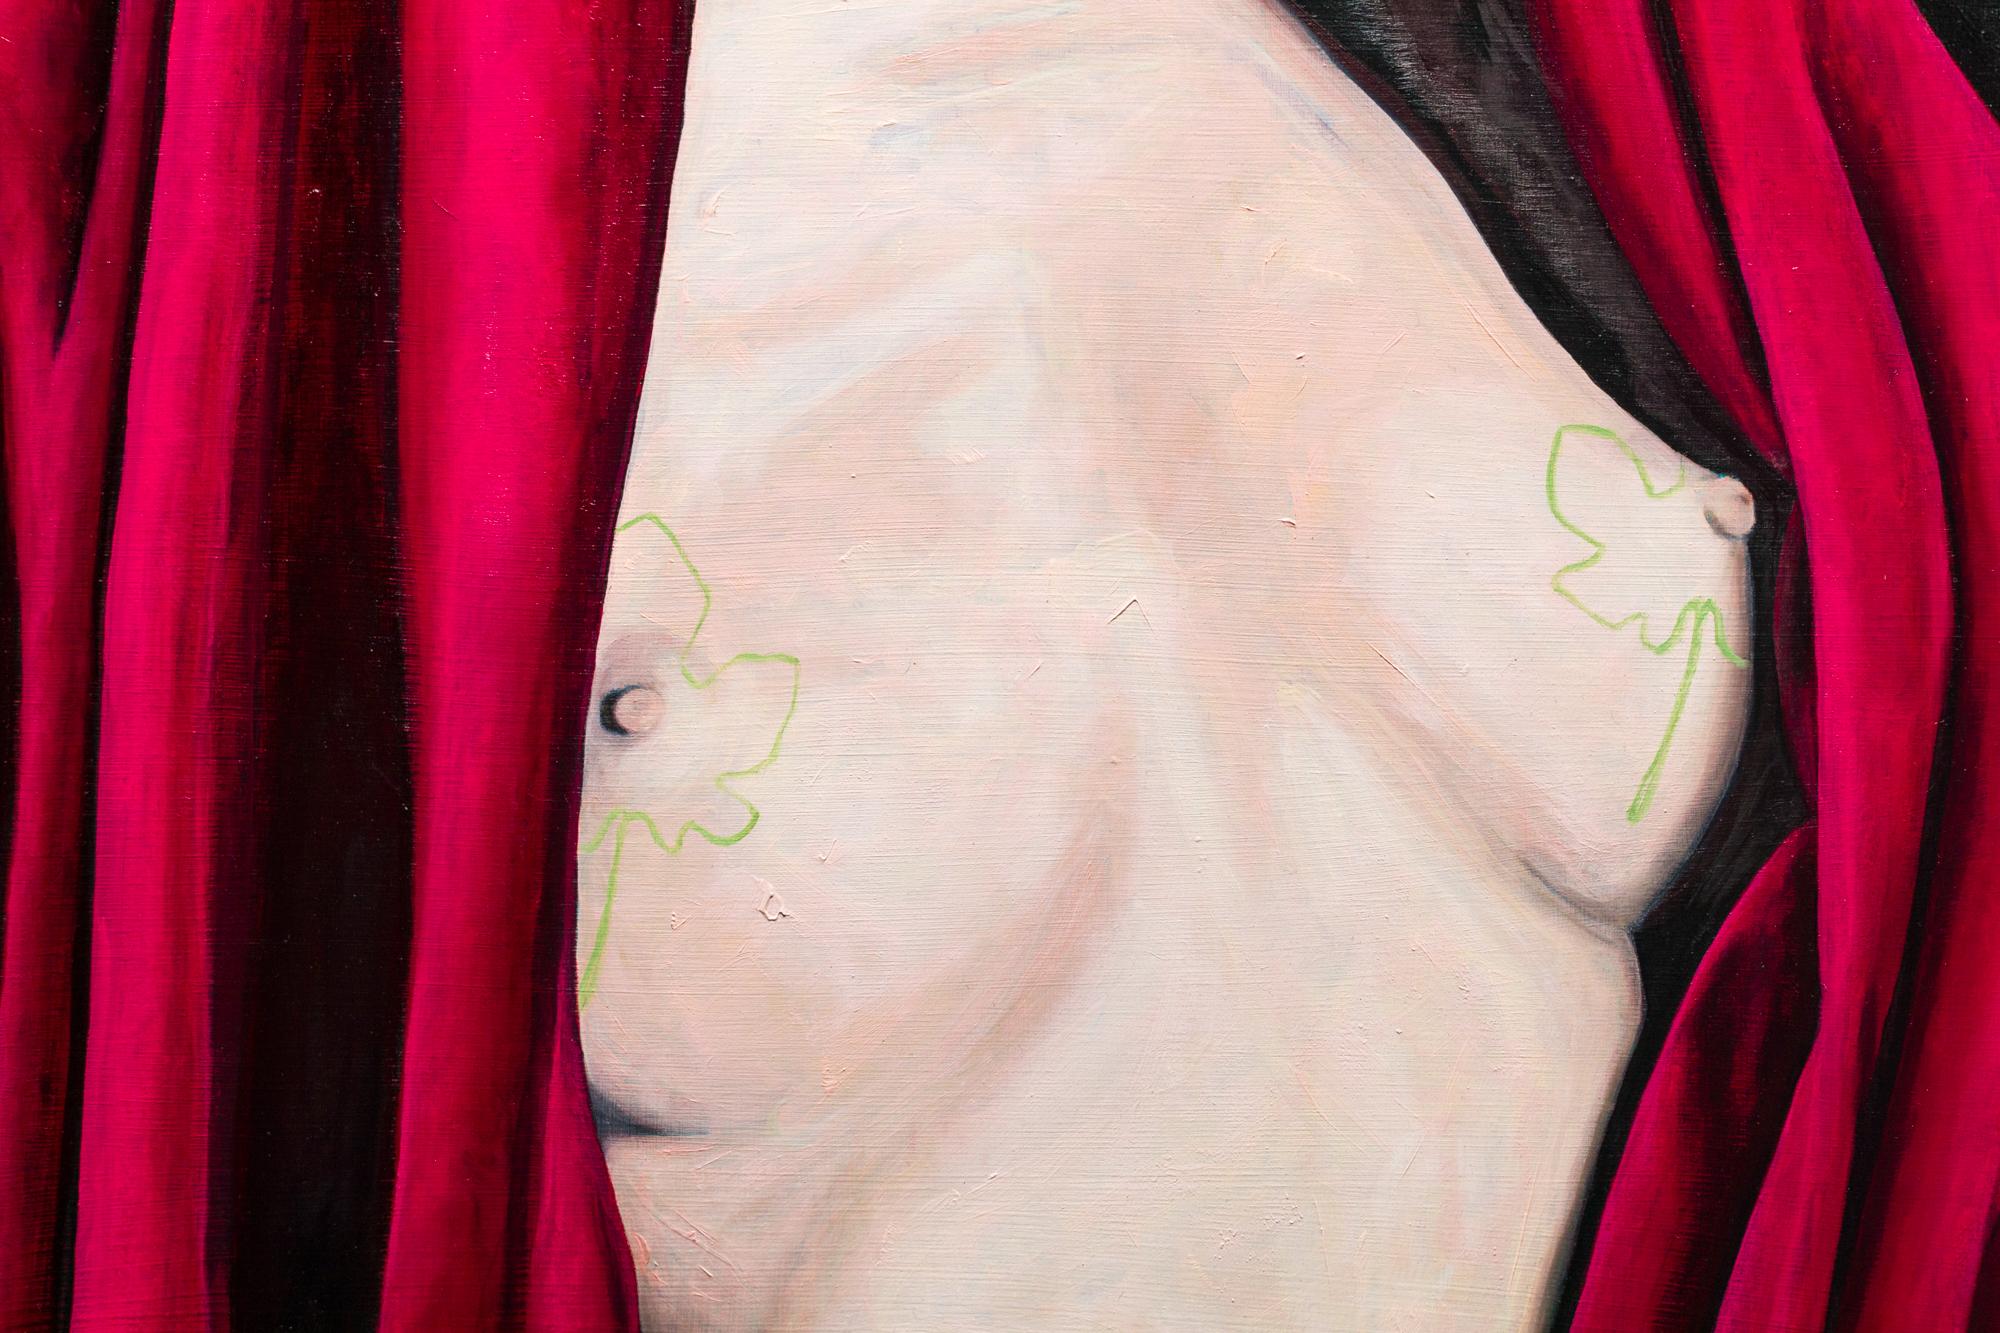 This female nude piece titled 